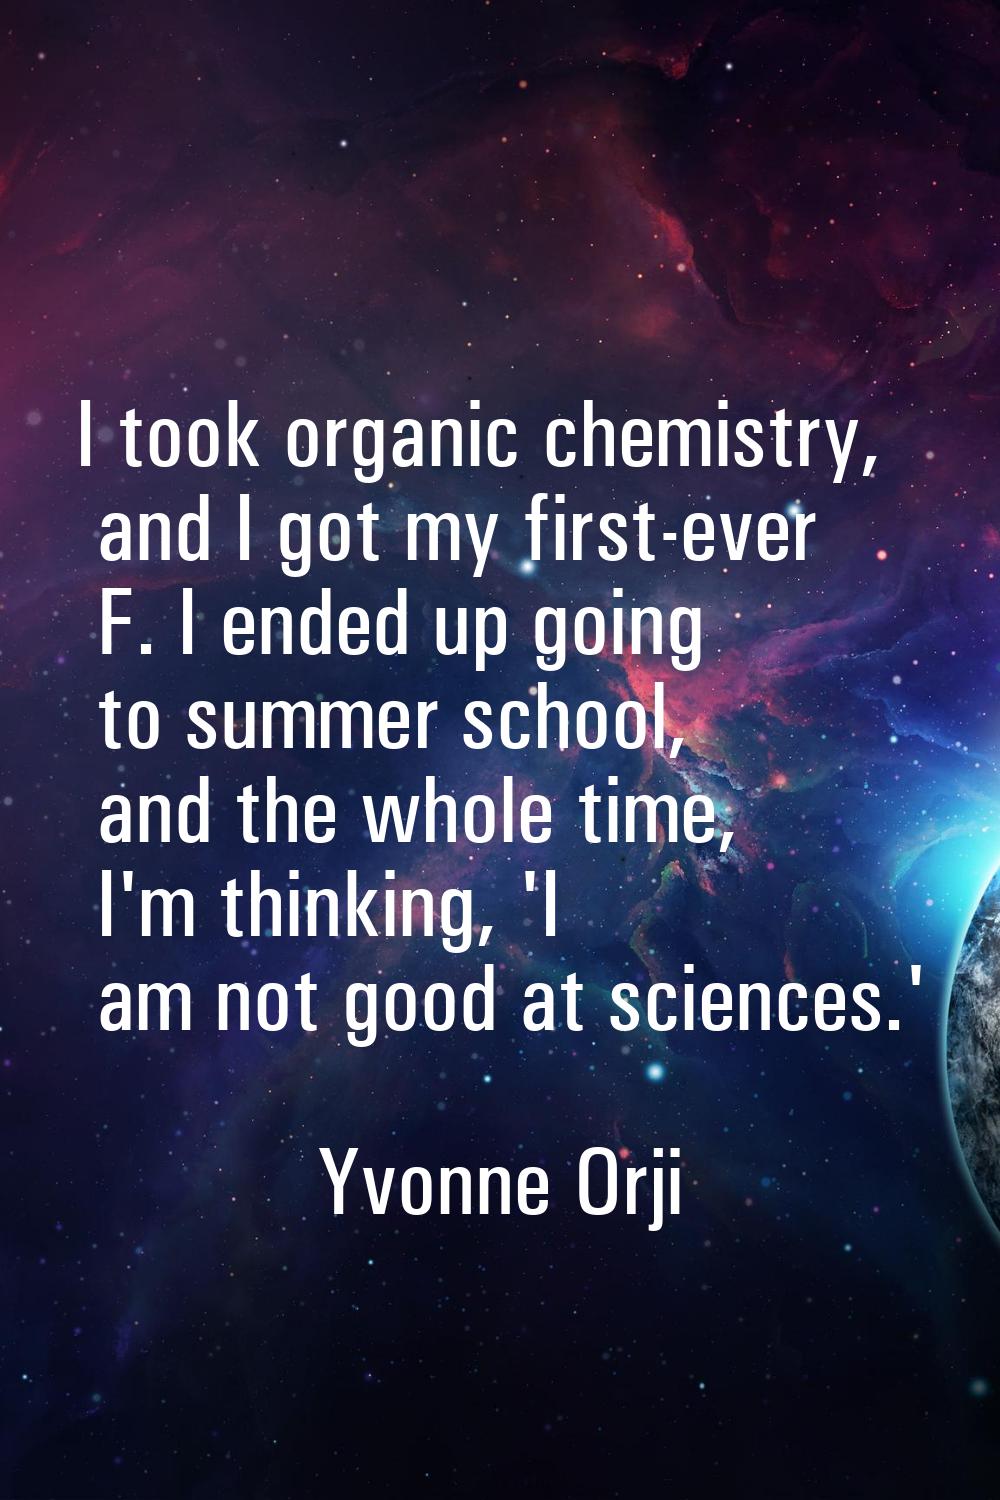 I took organic chemistry, and I got my first-ever F. I ended up going to summer school, and the who